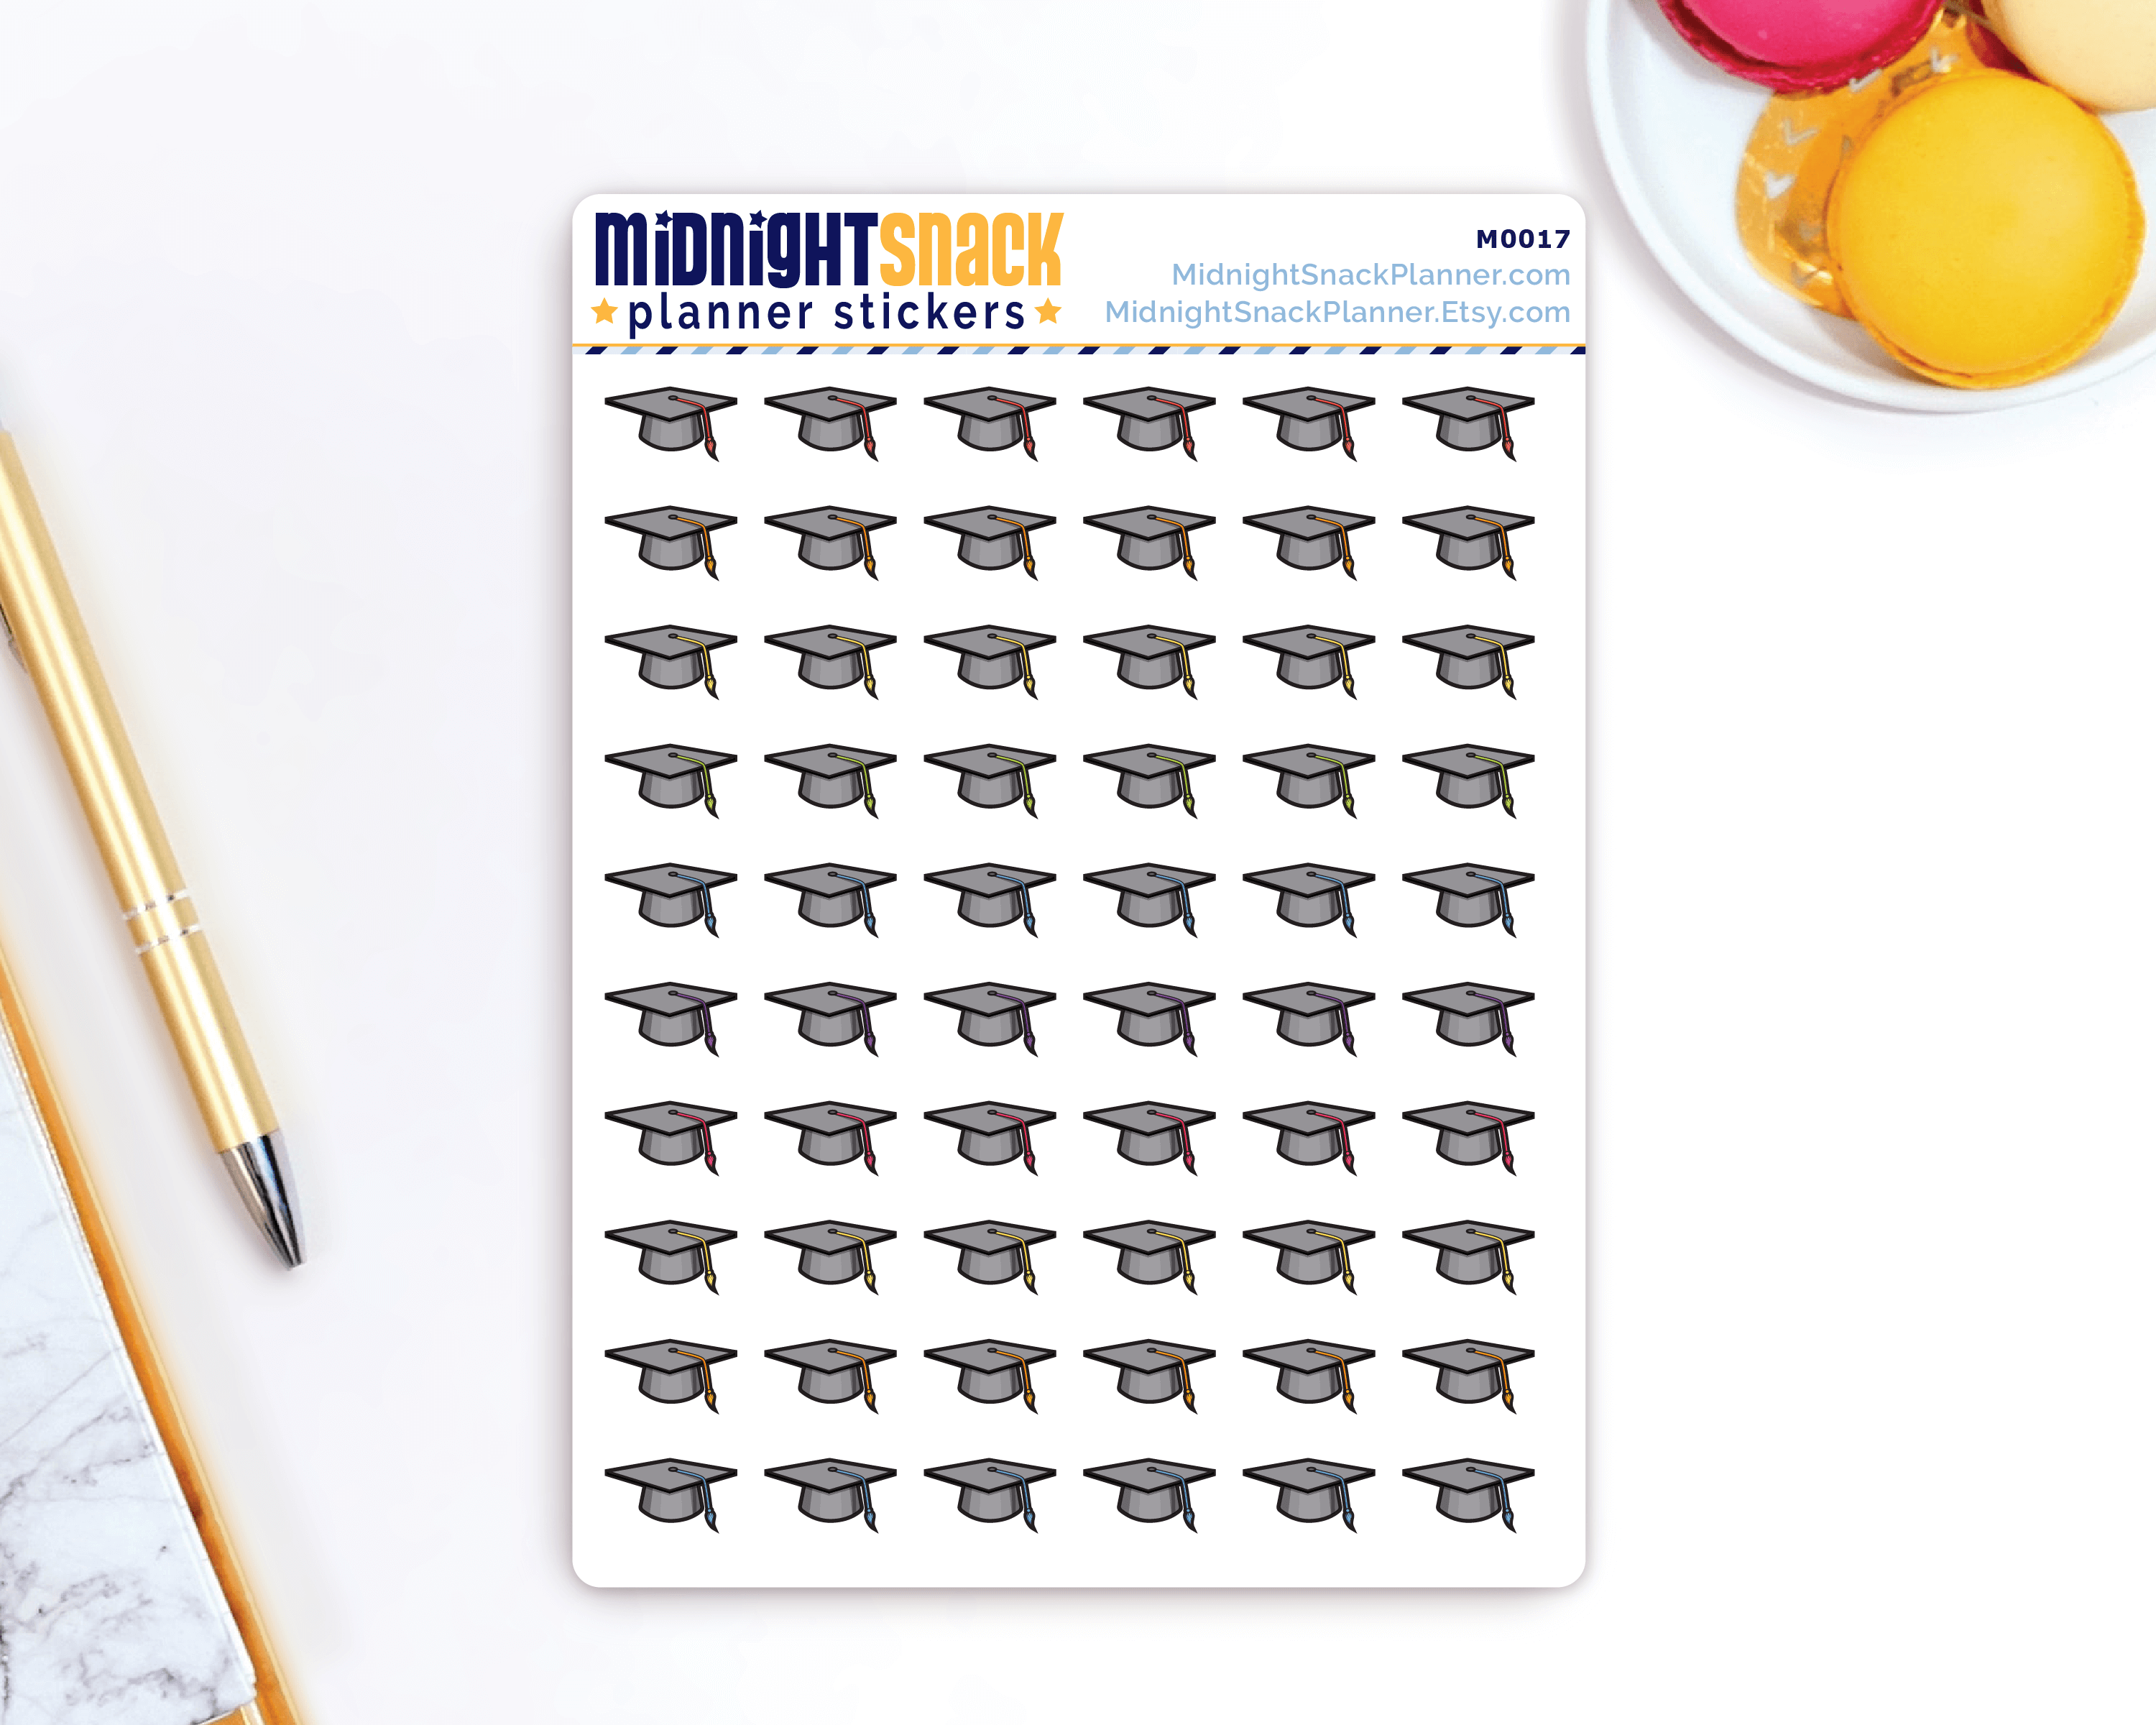 Graduation Cap Icon: Student Loan Due or Graduation Planner Stickers: Midnight Snack Planner